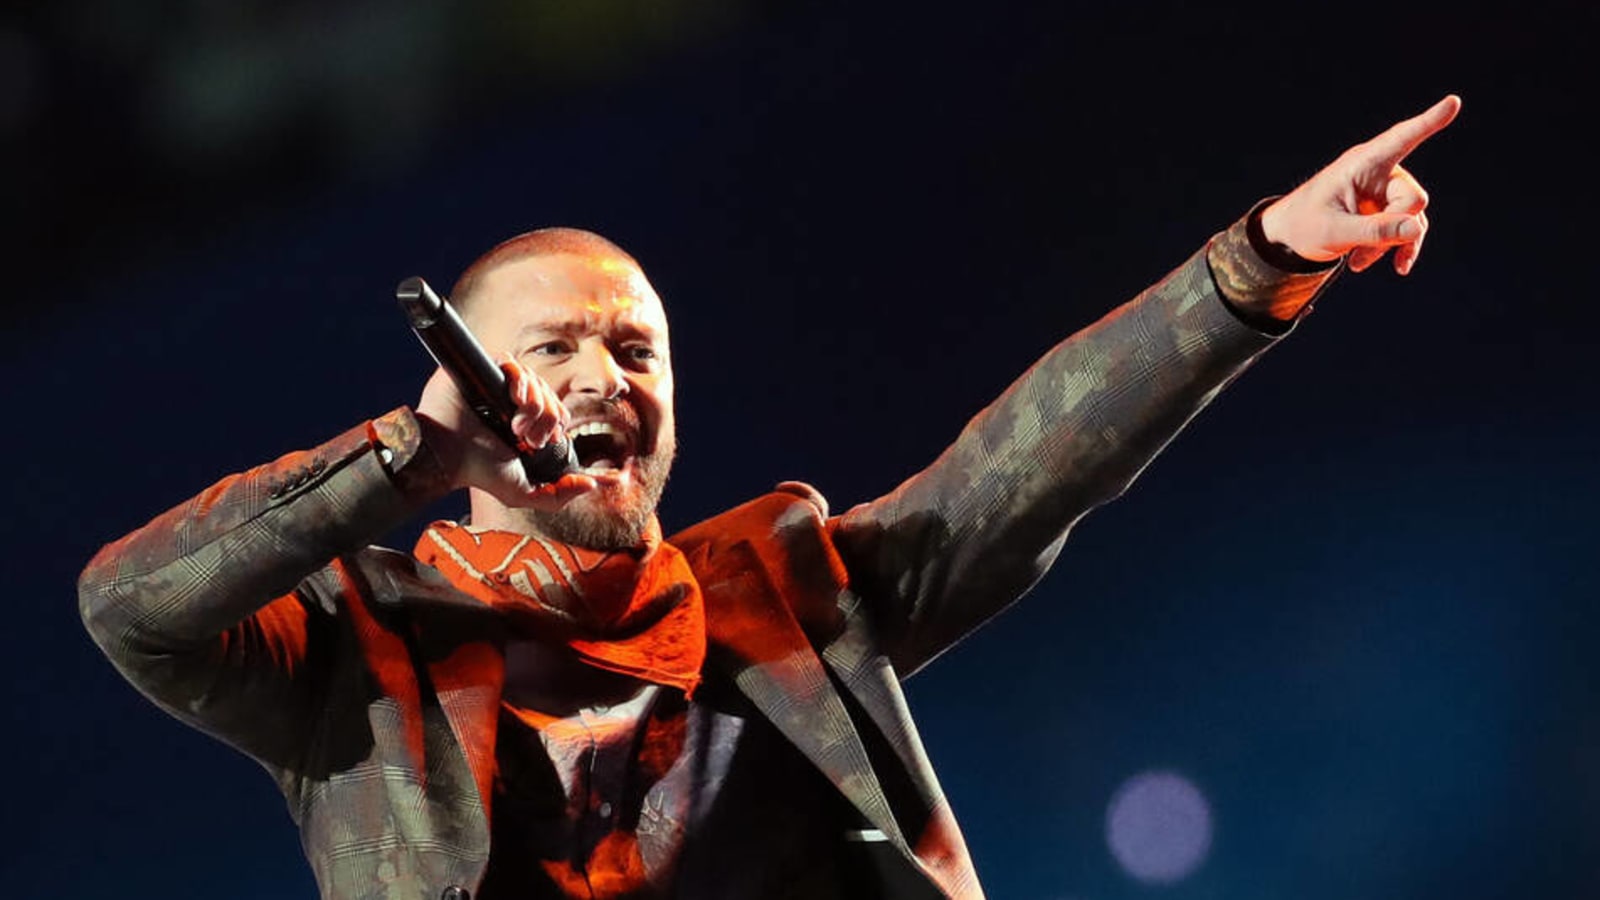 Justin Timberlake, Timbaland to curate music for 'Monday Night Football'